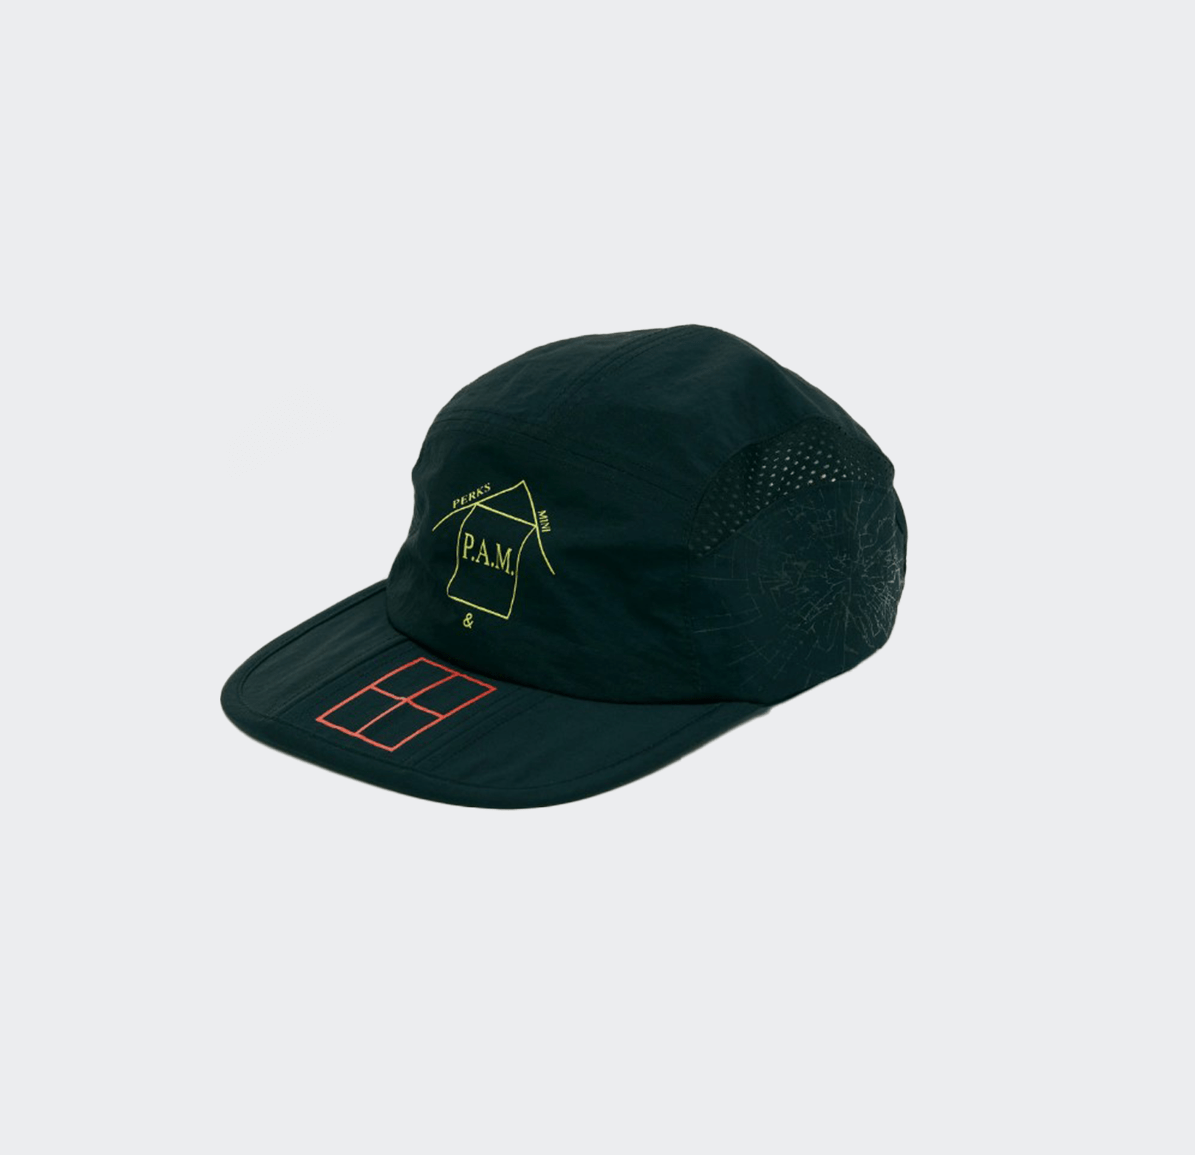 Perks And Mini Security Foldable Cap - Black - P.A.M. - State Of Play